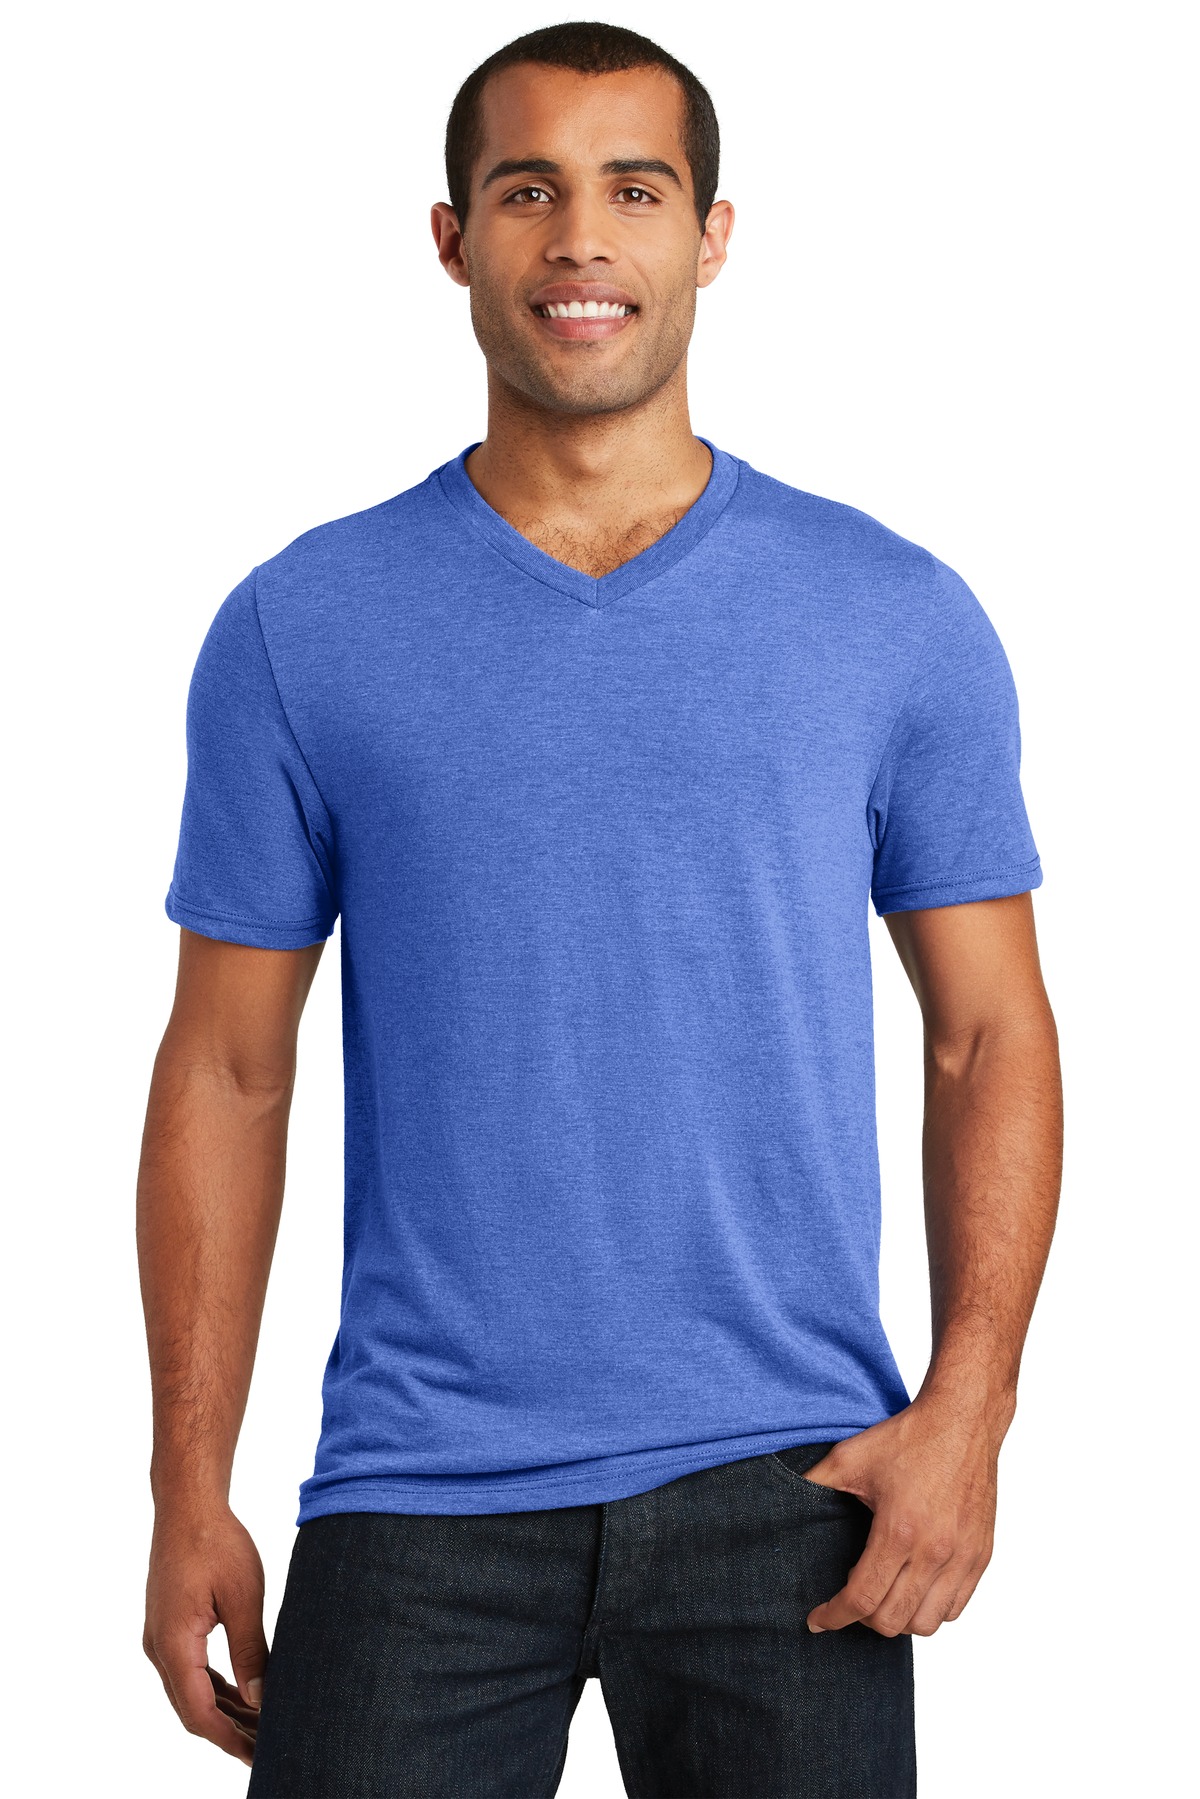 District   Perfect Tri V-Neck Tee. DT1350